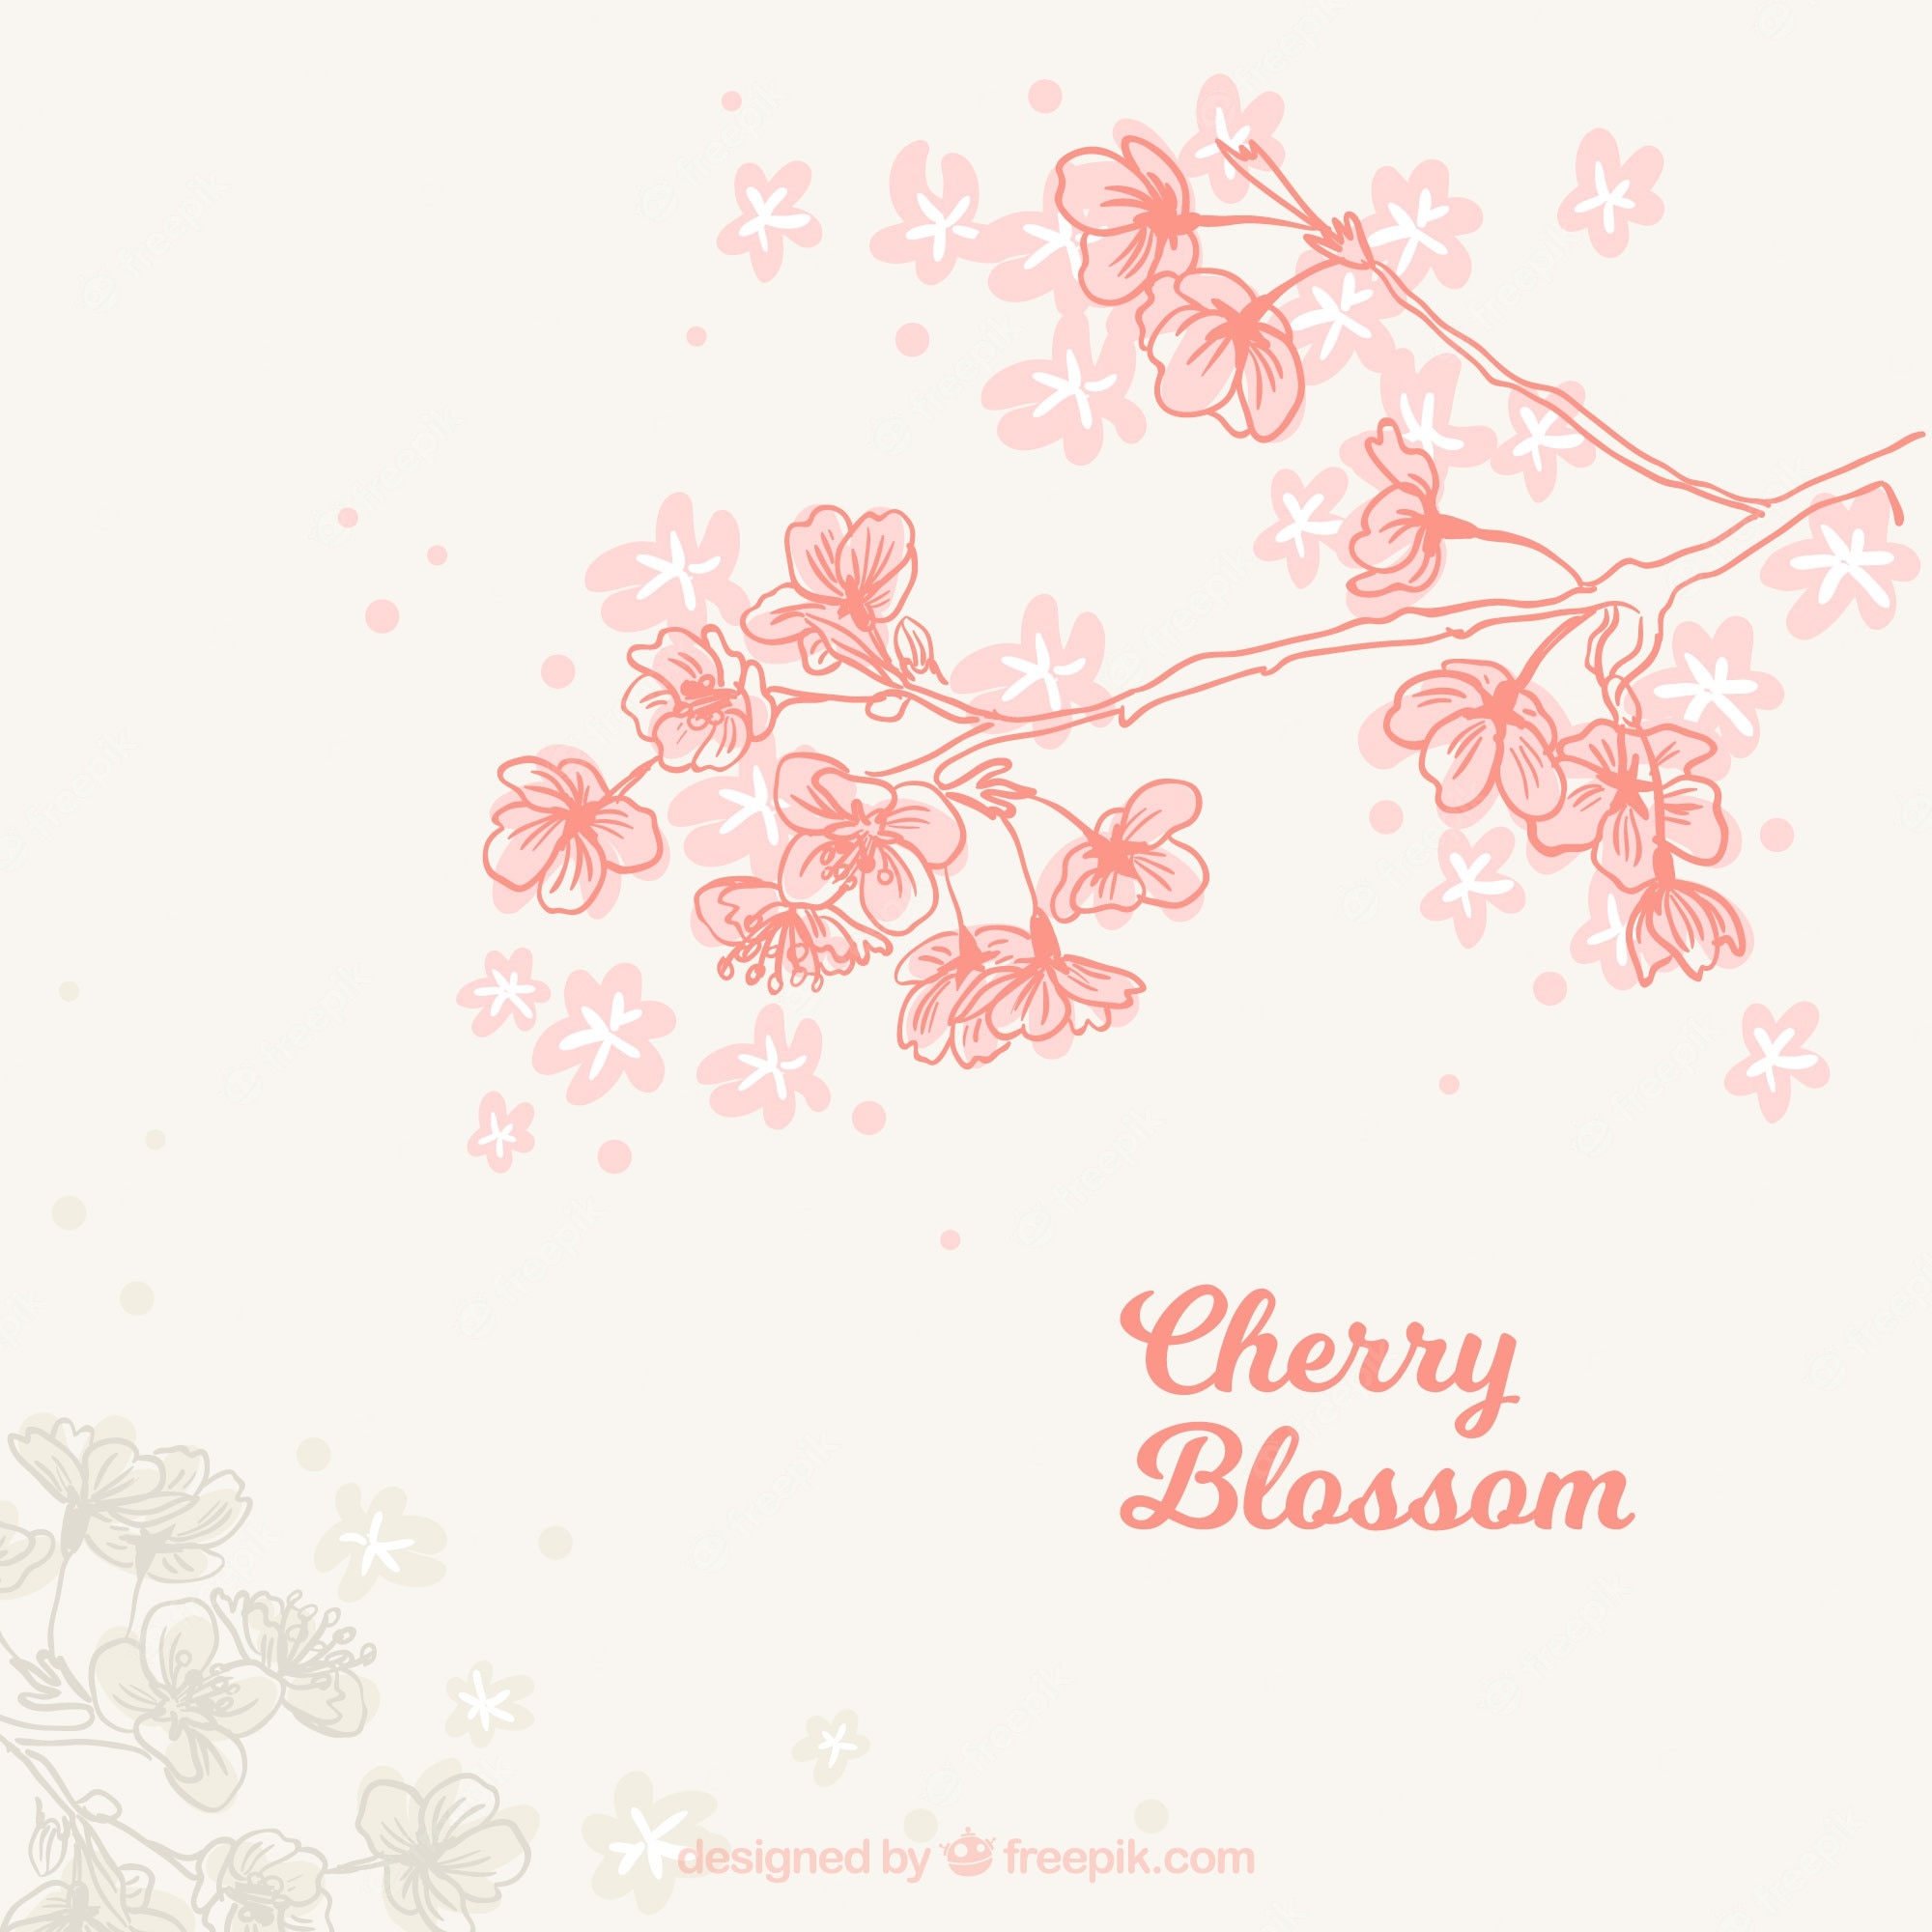 Cute Cherry Blossom Wallpapers